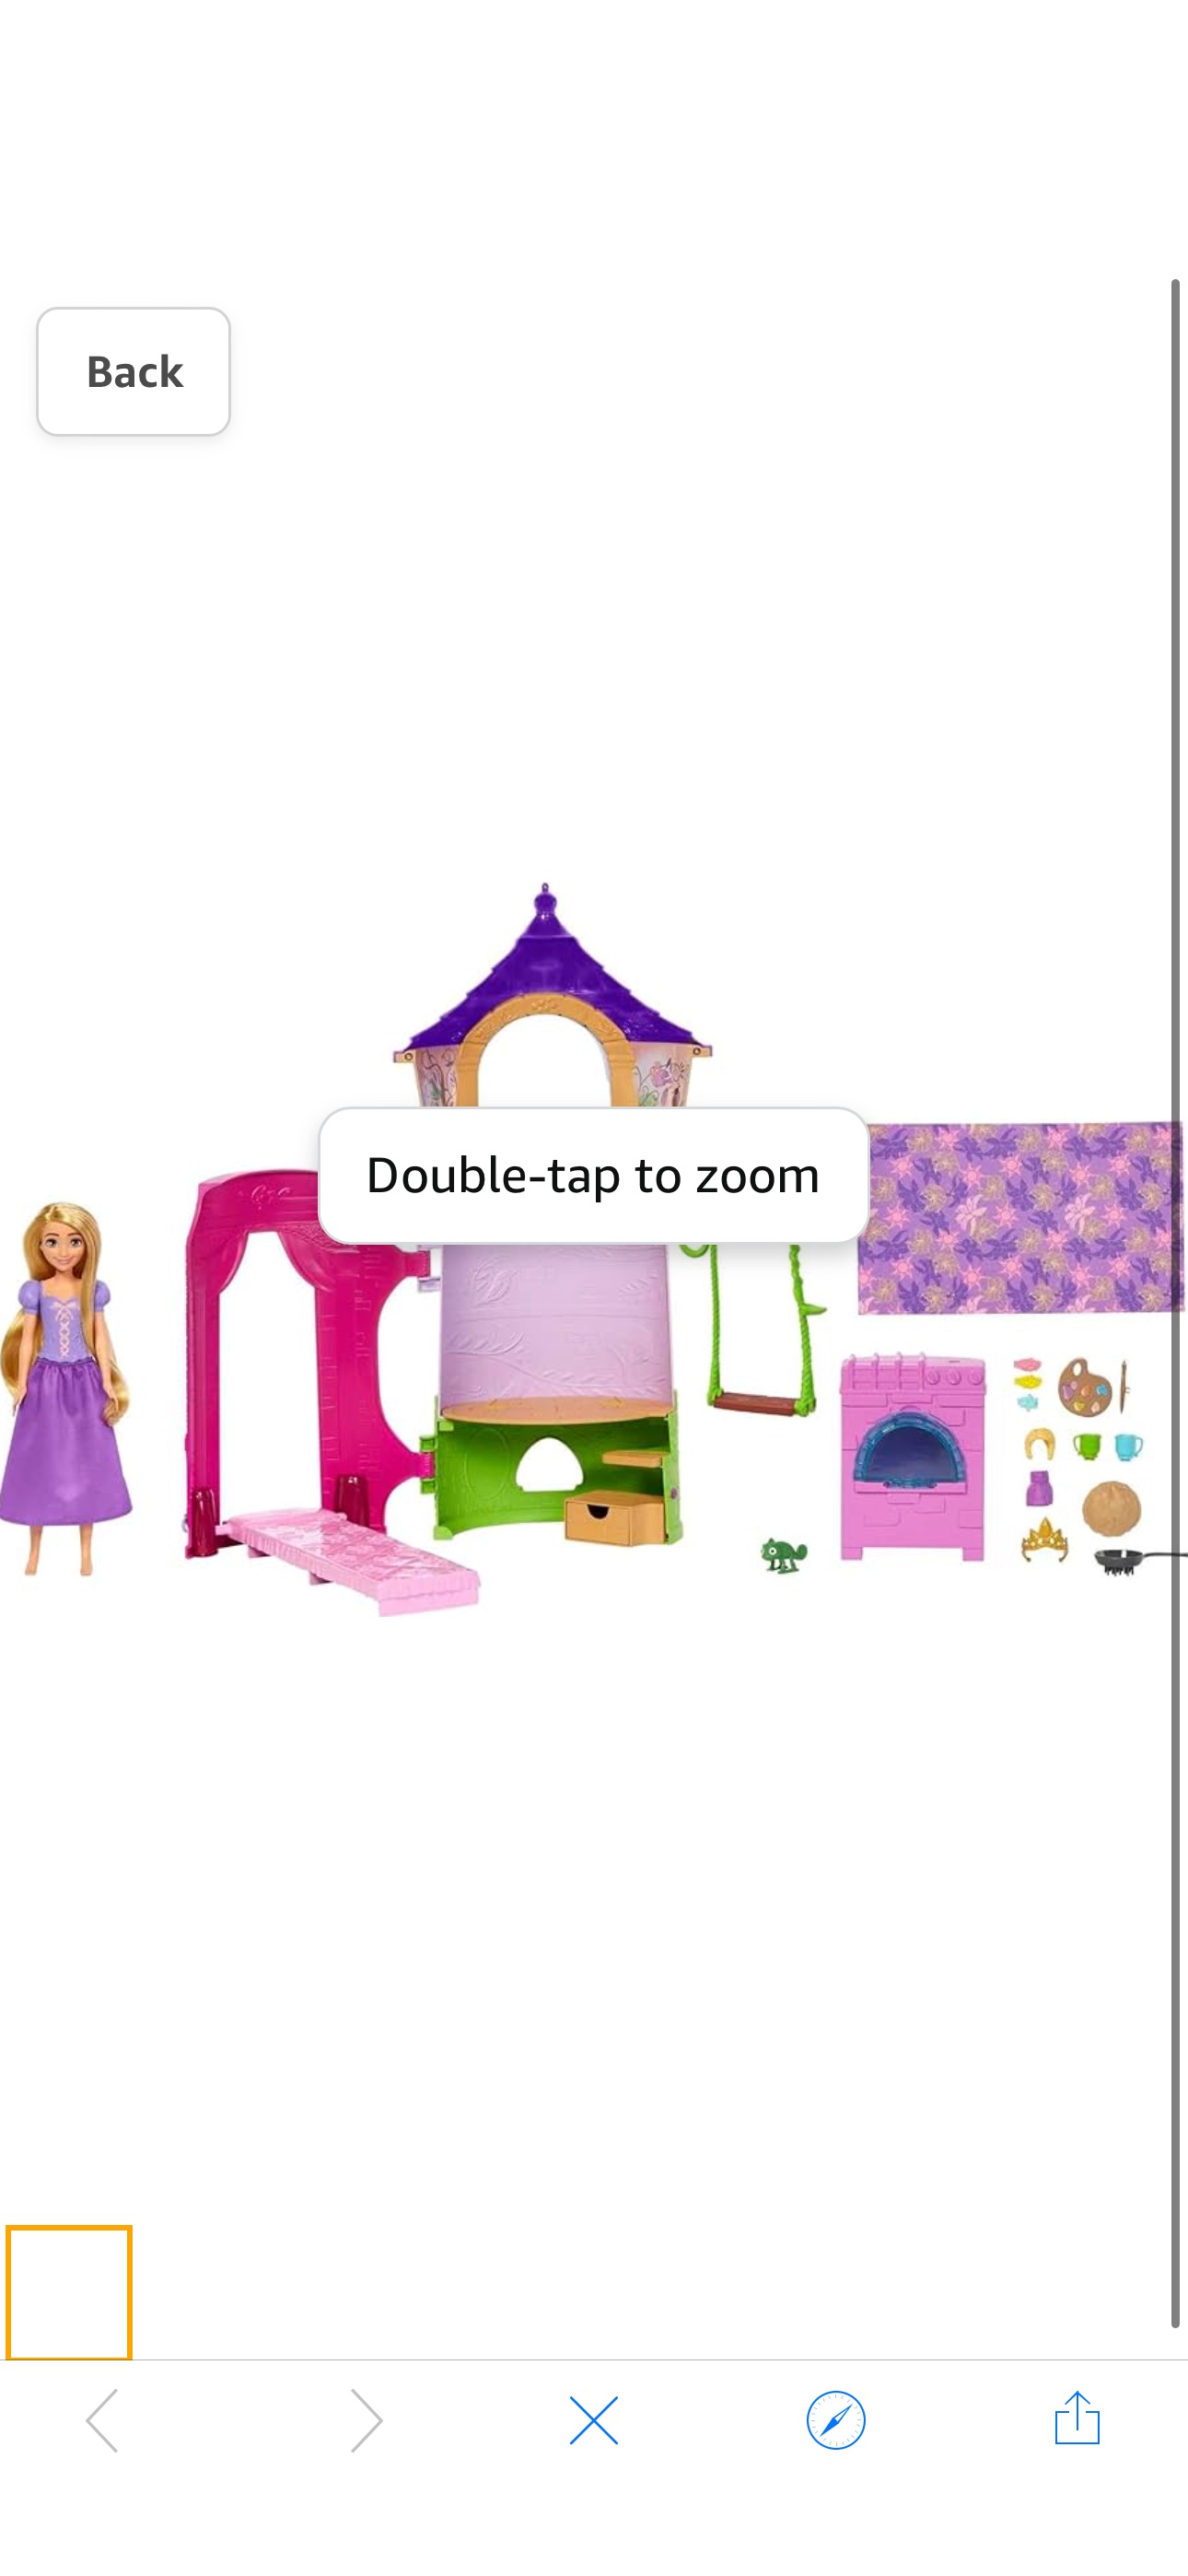 Amazon.com: Mattel Disney Princess Rapunzel Tower Doll House Playset with Rapunzel Fashion Doll, 6 Play Areas, 15 Accessories and Pascal : Toys & Games